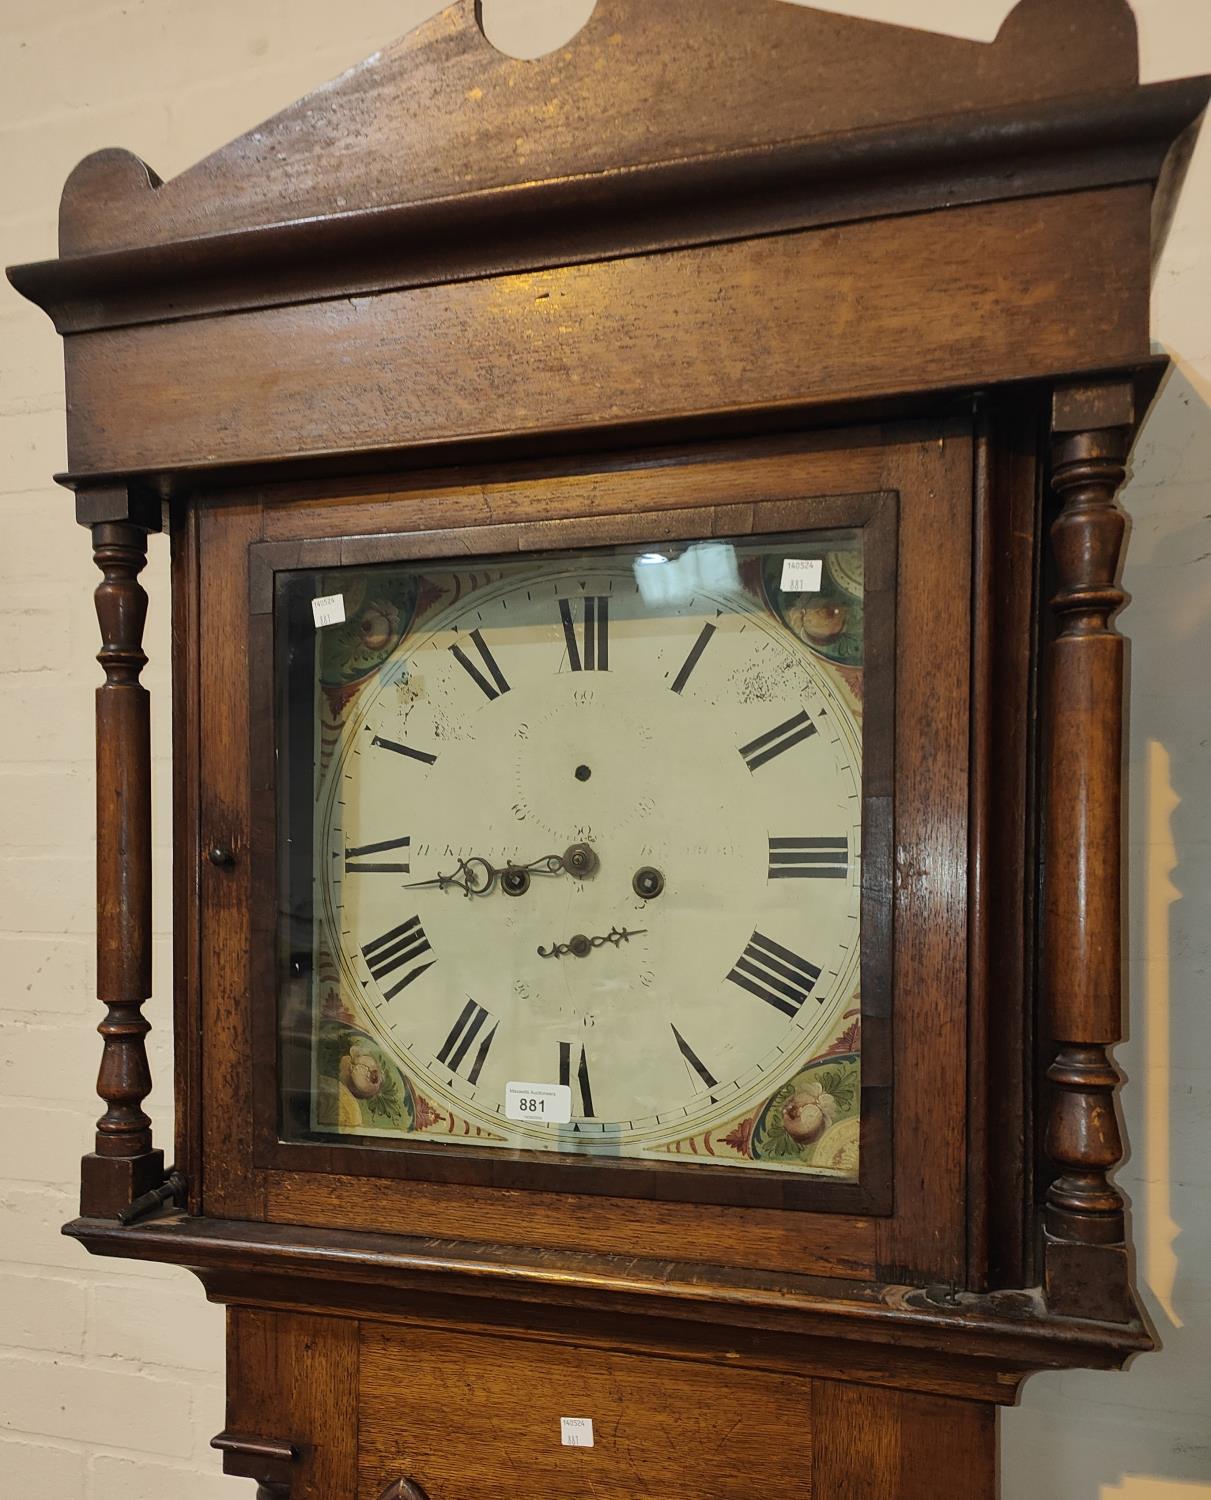 An early 19th century oak and mahogany longcase clock with architectural pediment and turned columns - Image 2 of 2